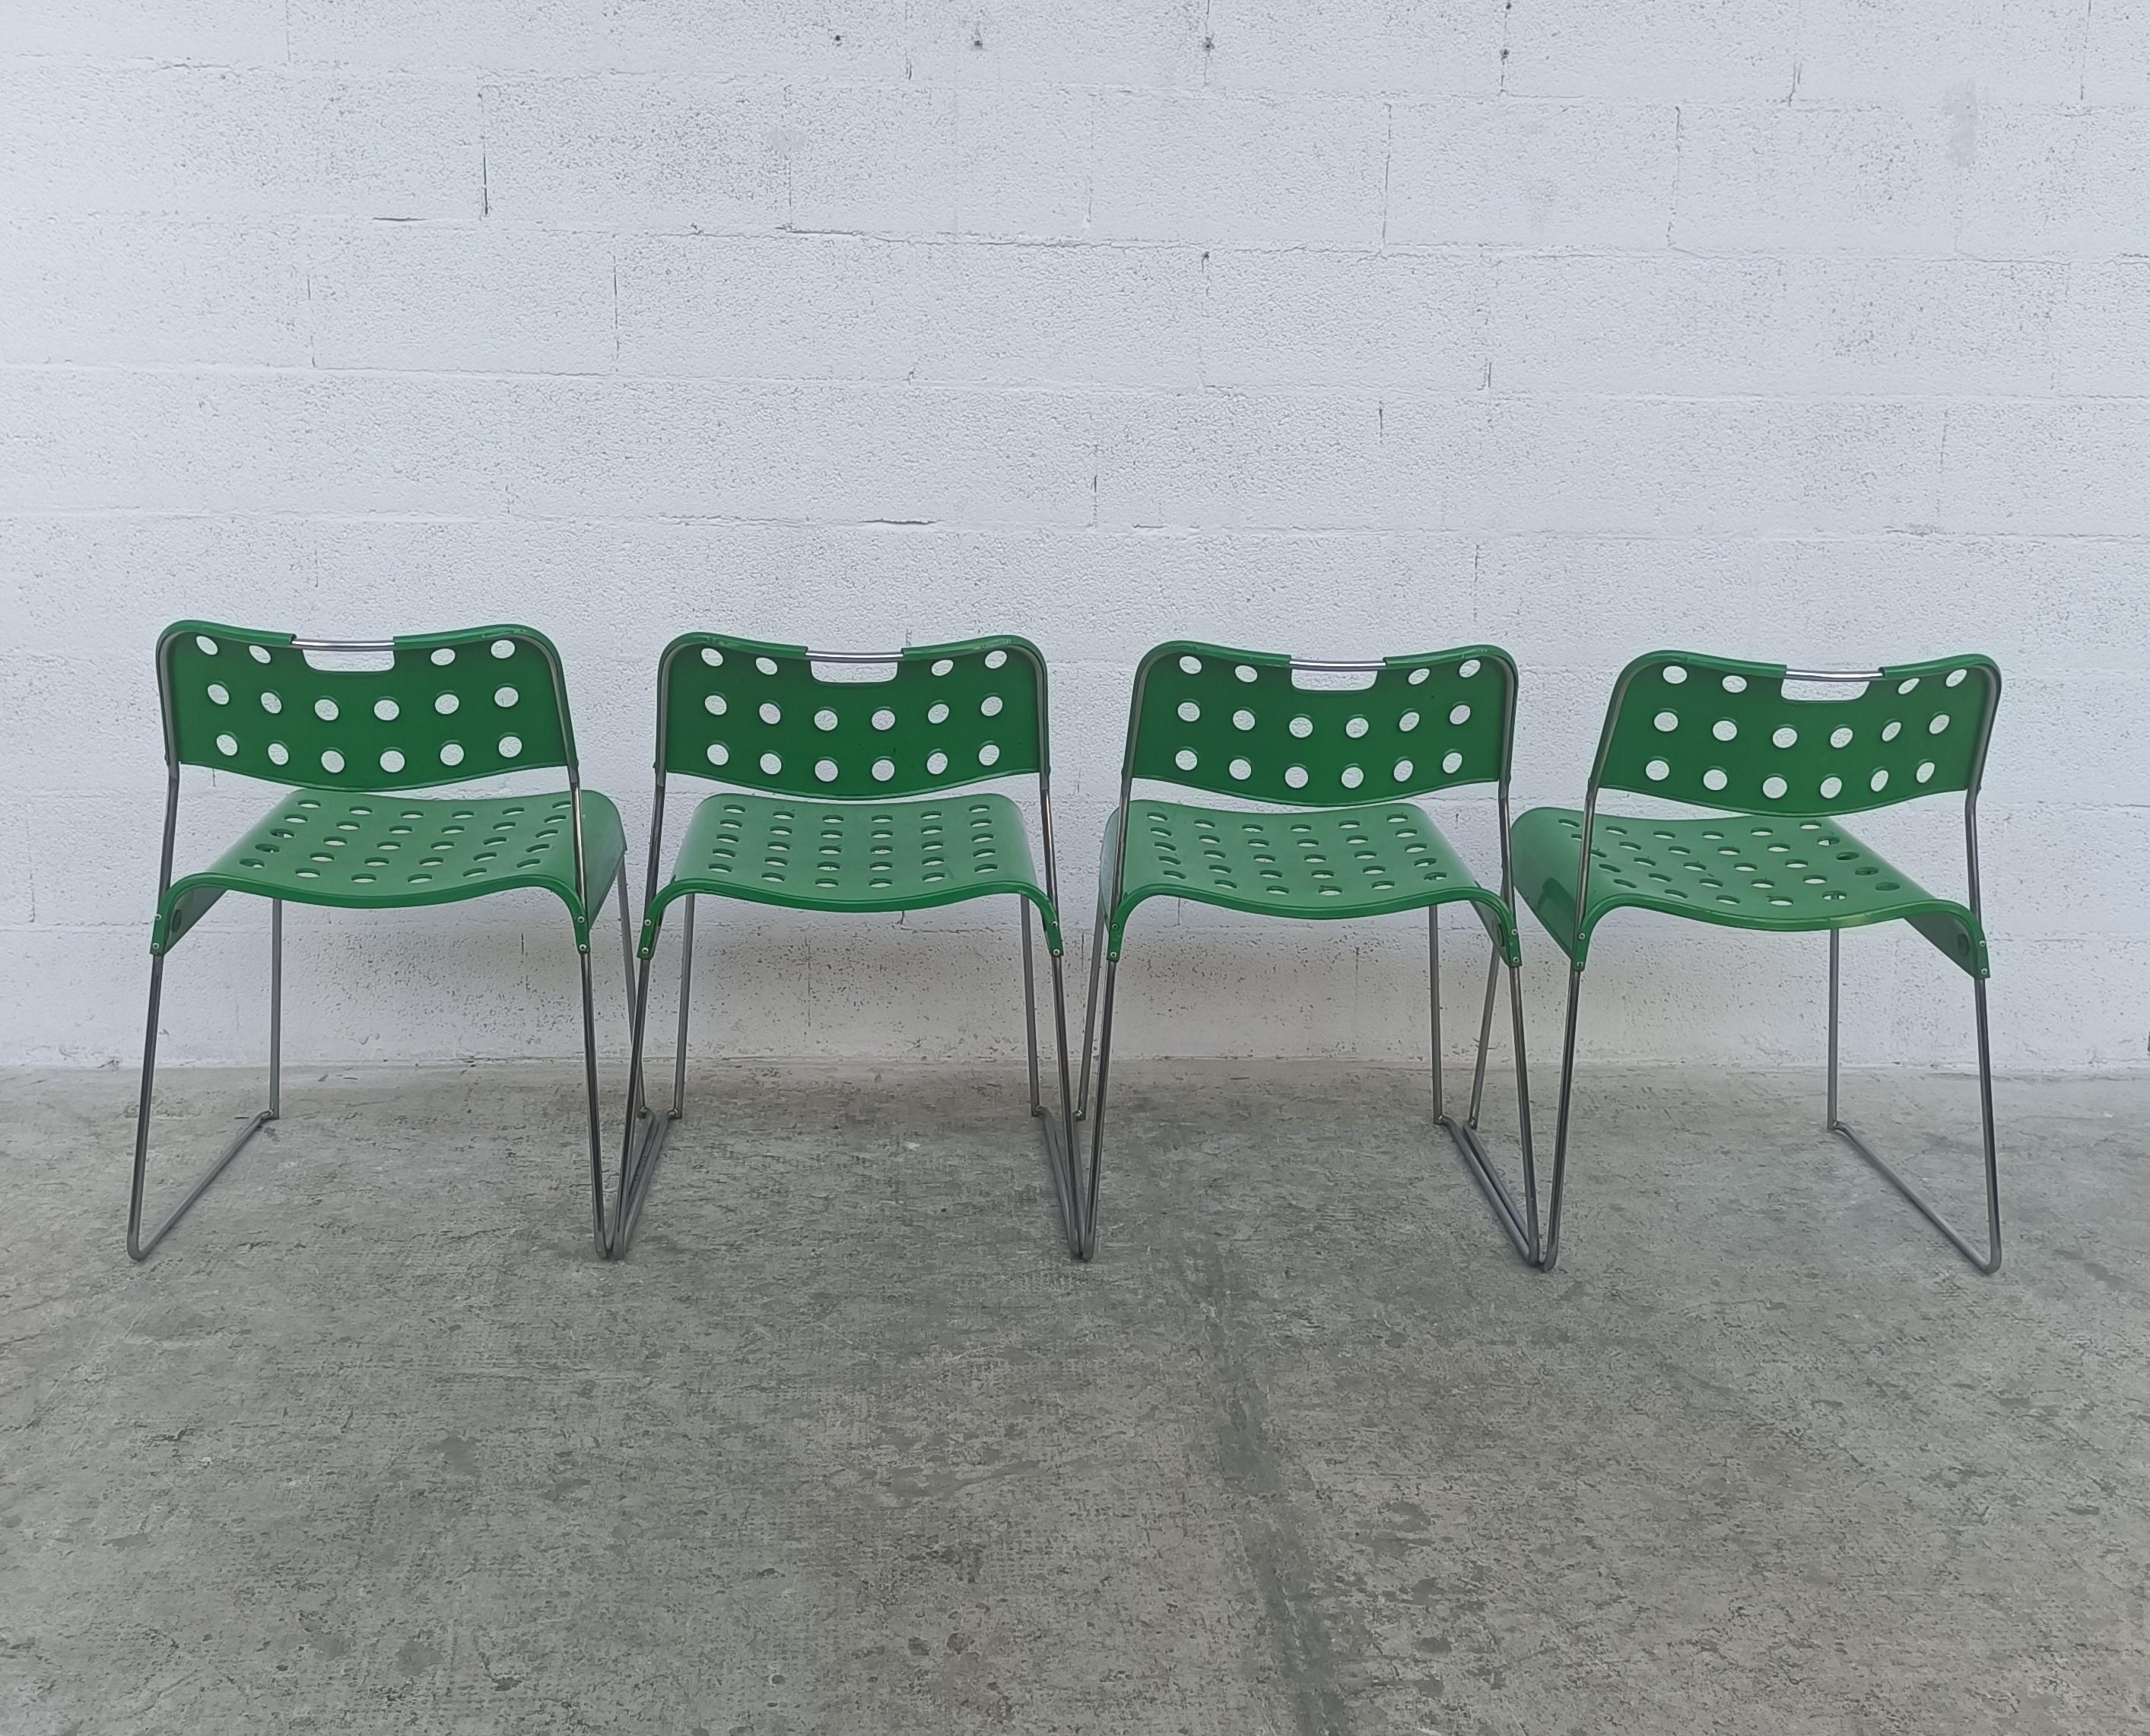 Mid-Century Modern 4 Green Omkstak Stackable Chairs by Rodney Kinsman for Bieffeplast 70s For Sale